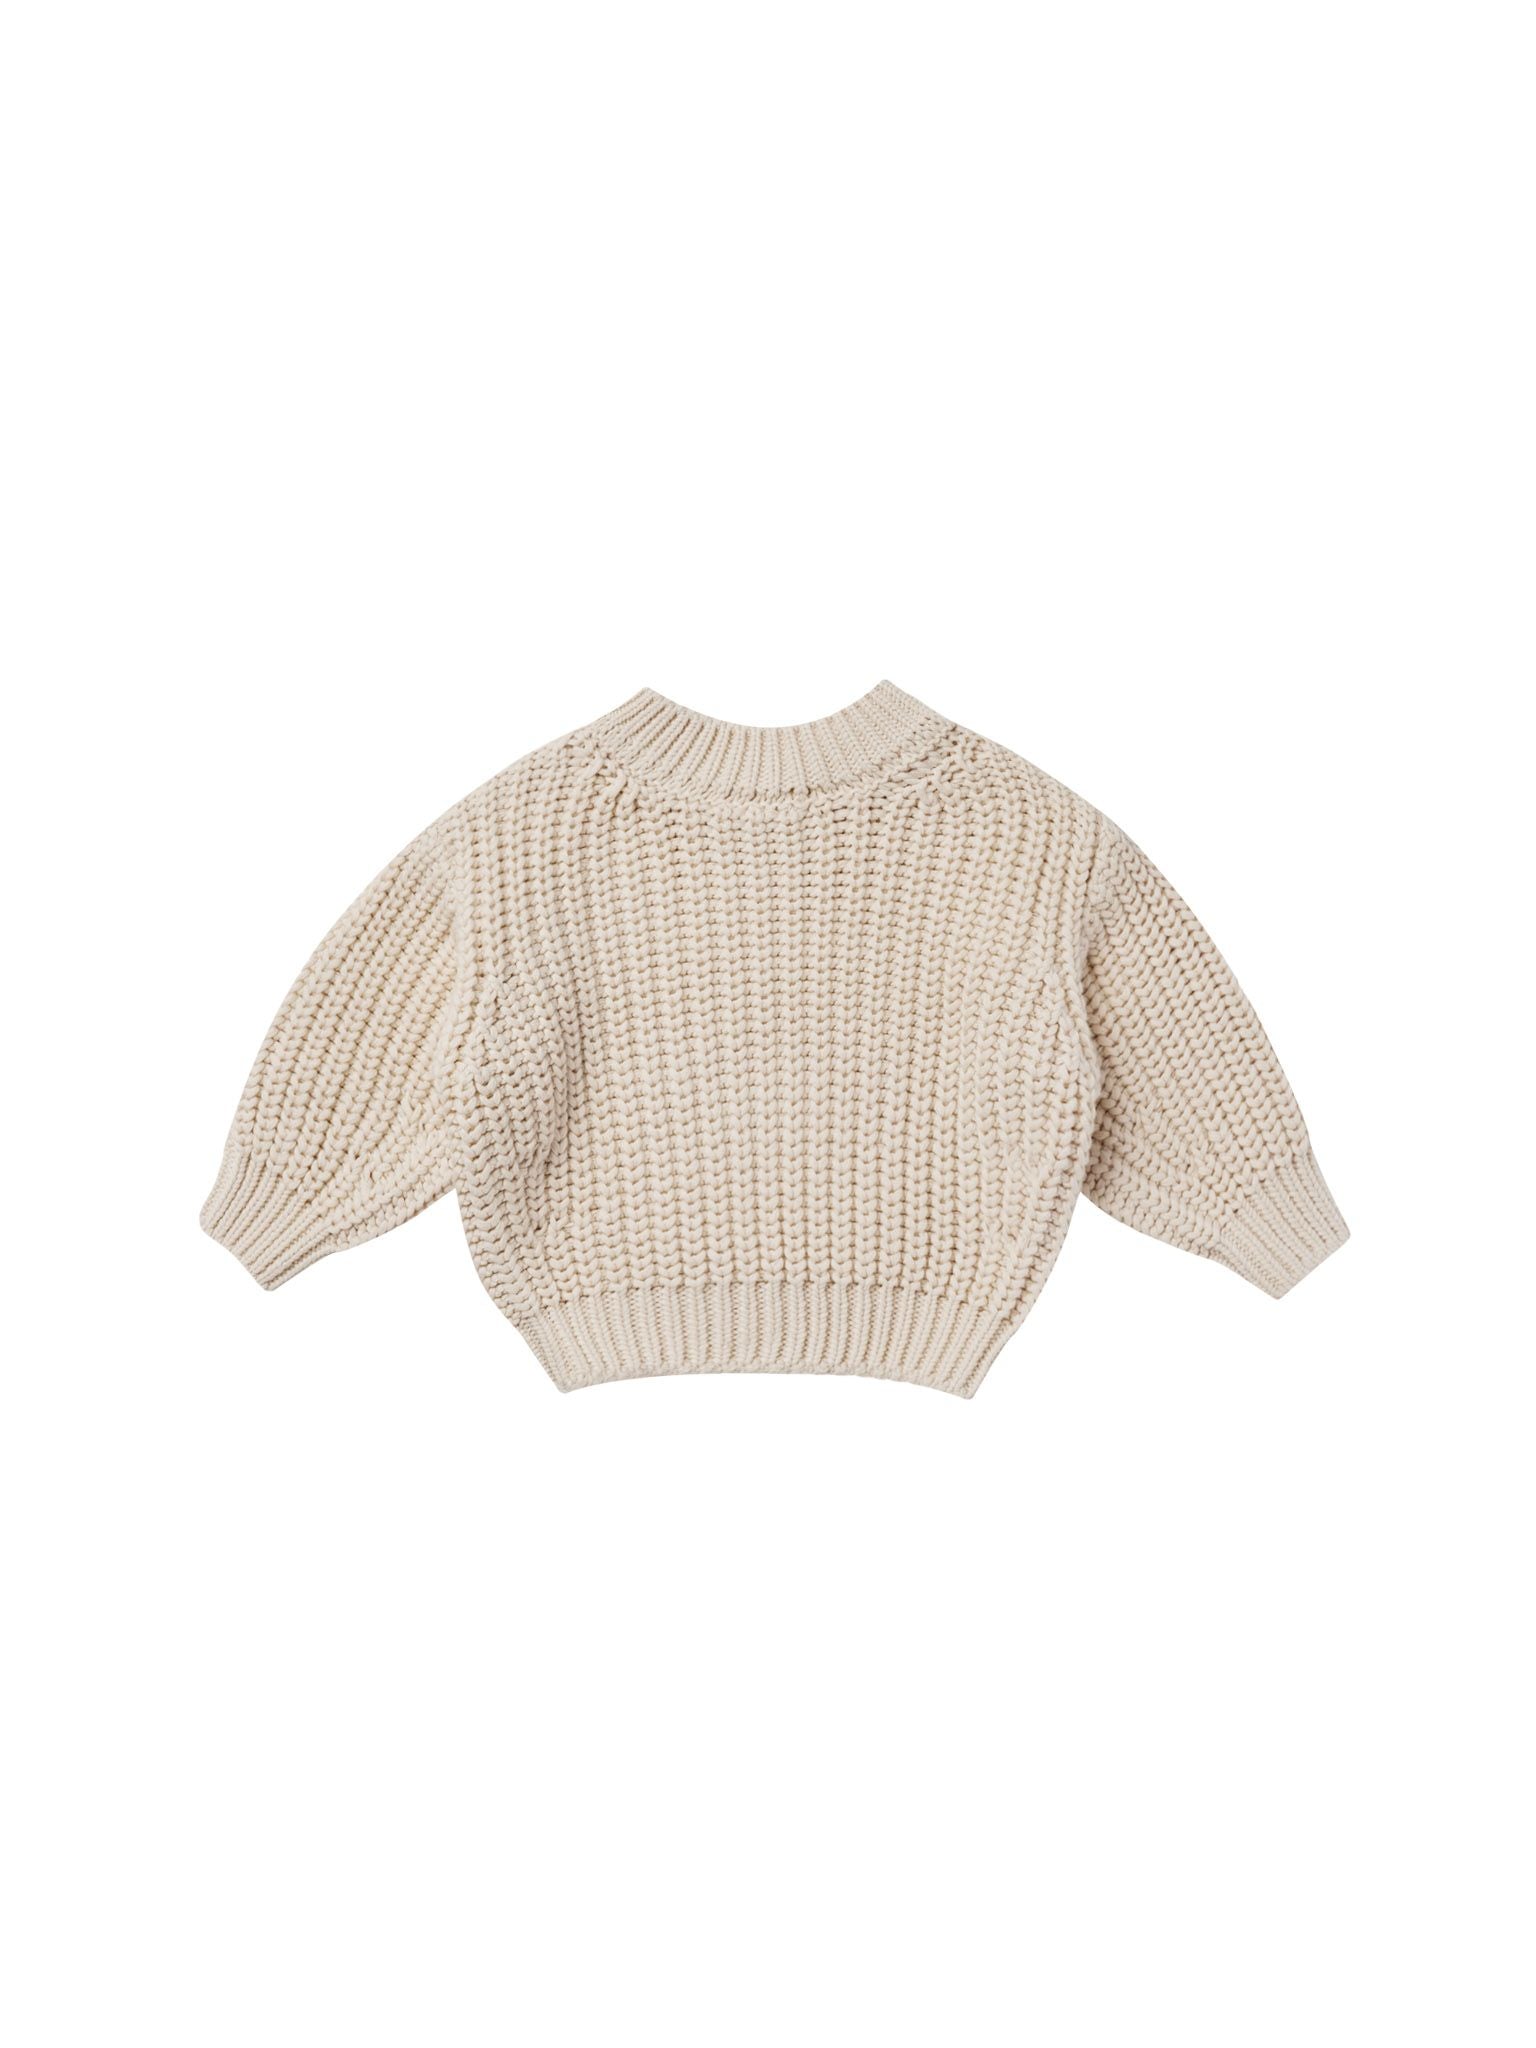 CHUNKY KNIT SWEATER | NATURAL - LAST ONE 6/12M